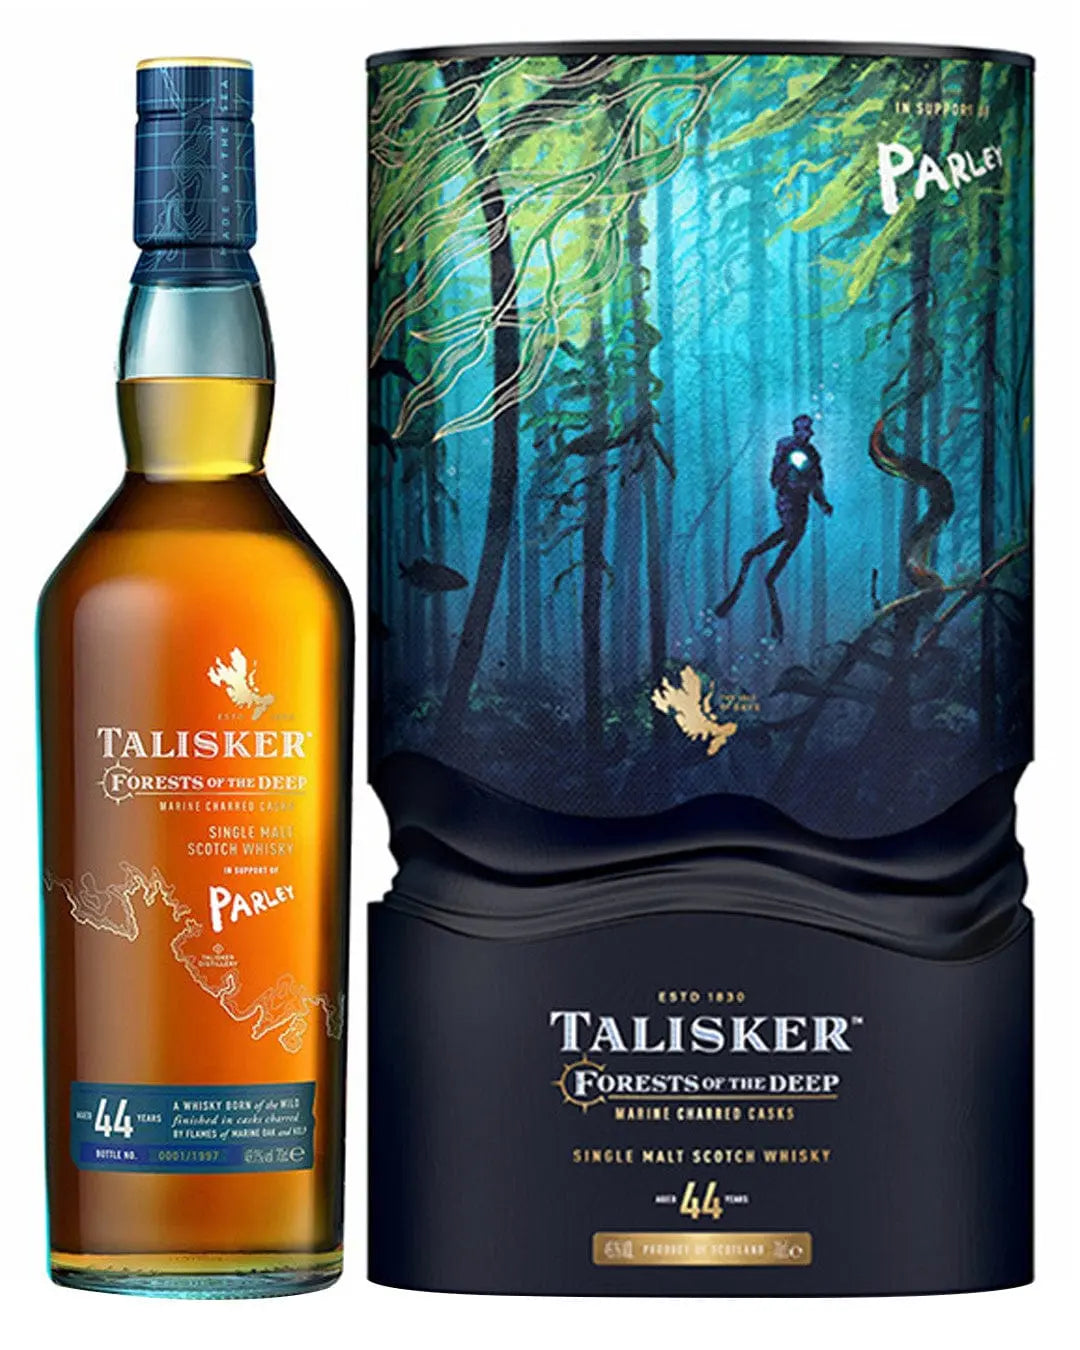 Talisker X Parley 44 Year Old Forests Of the Deep Island Whisky, 70 cl Whisky